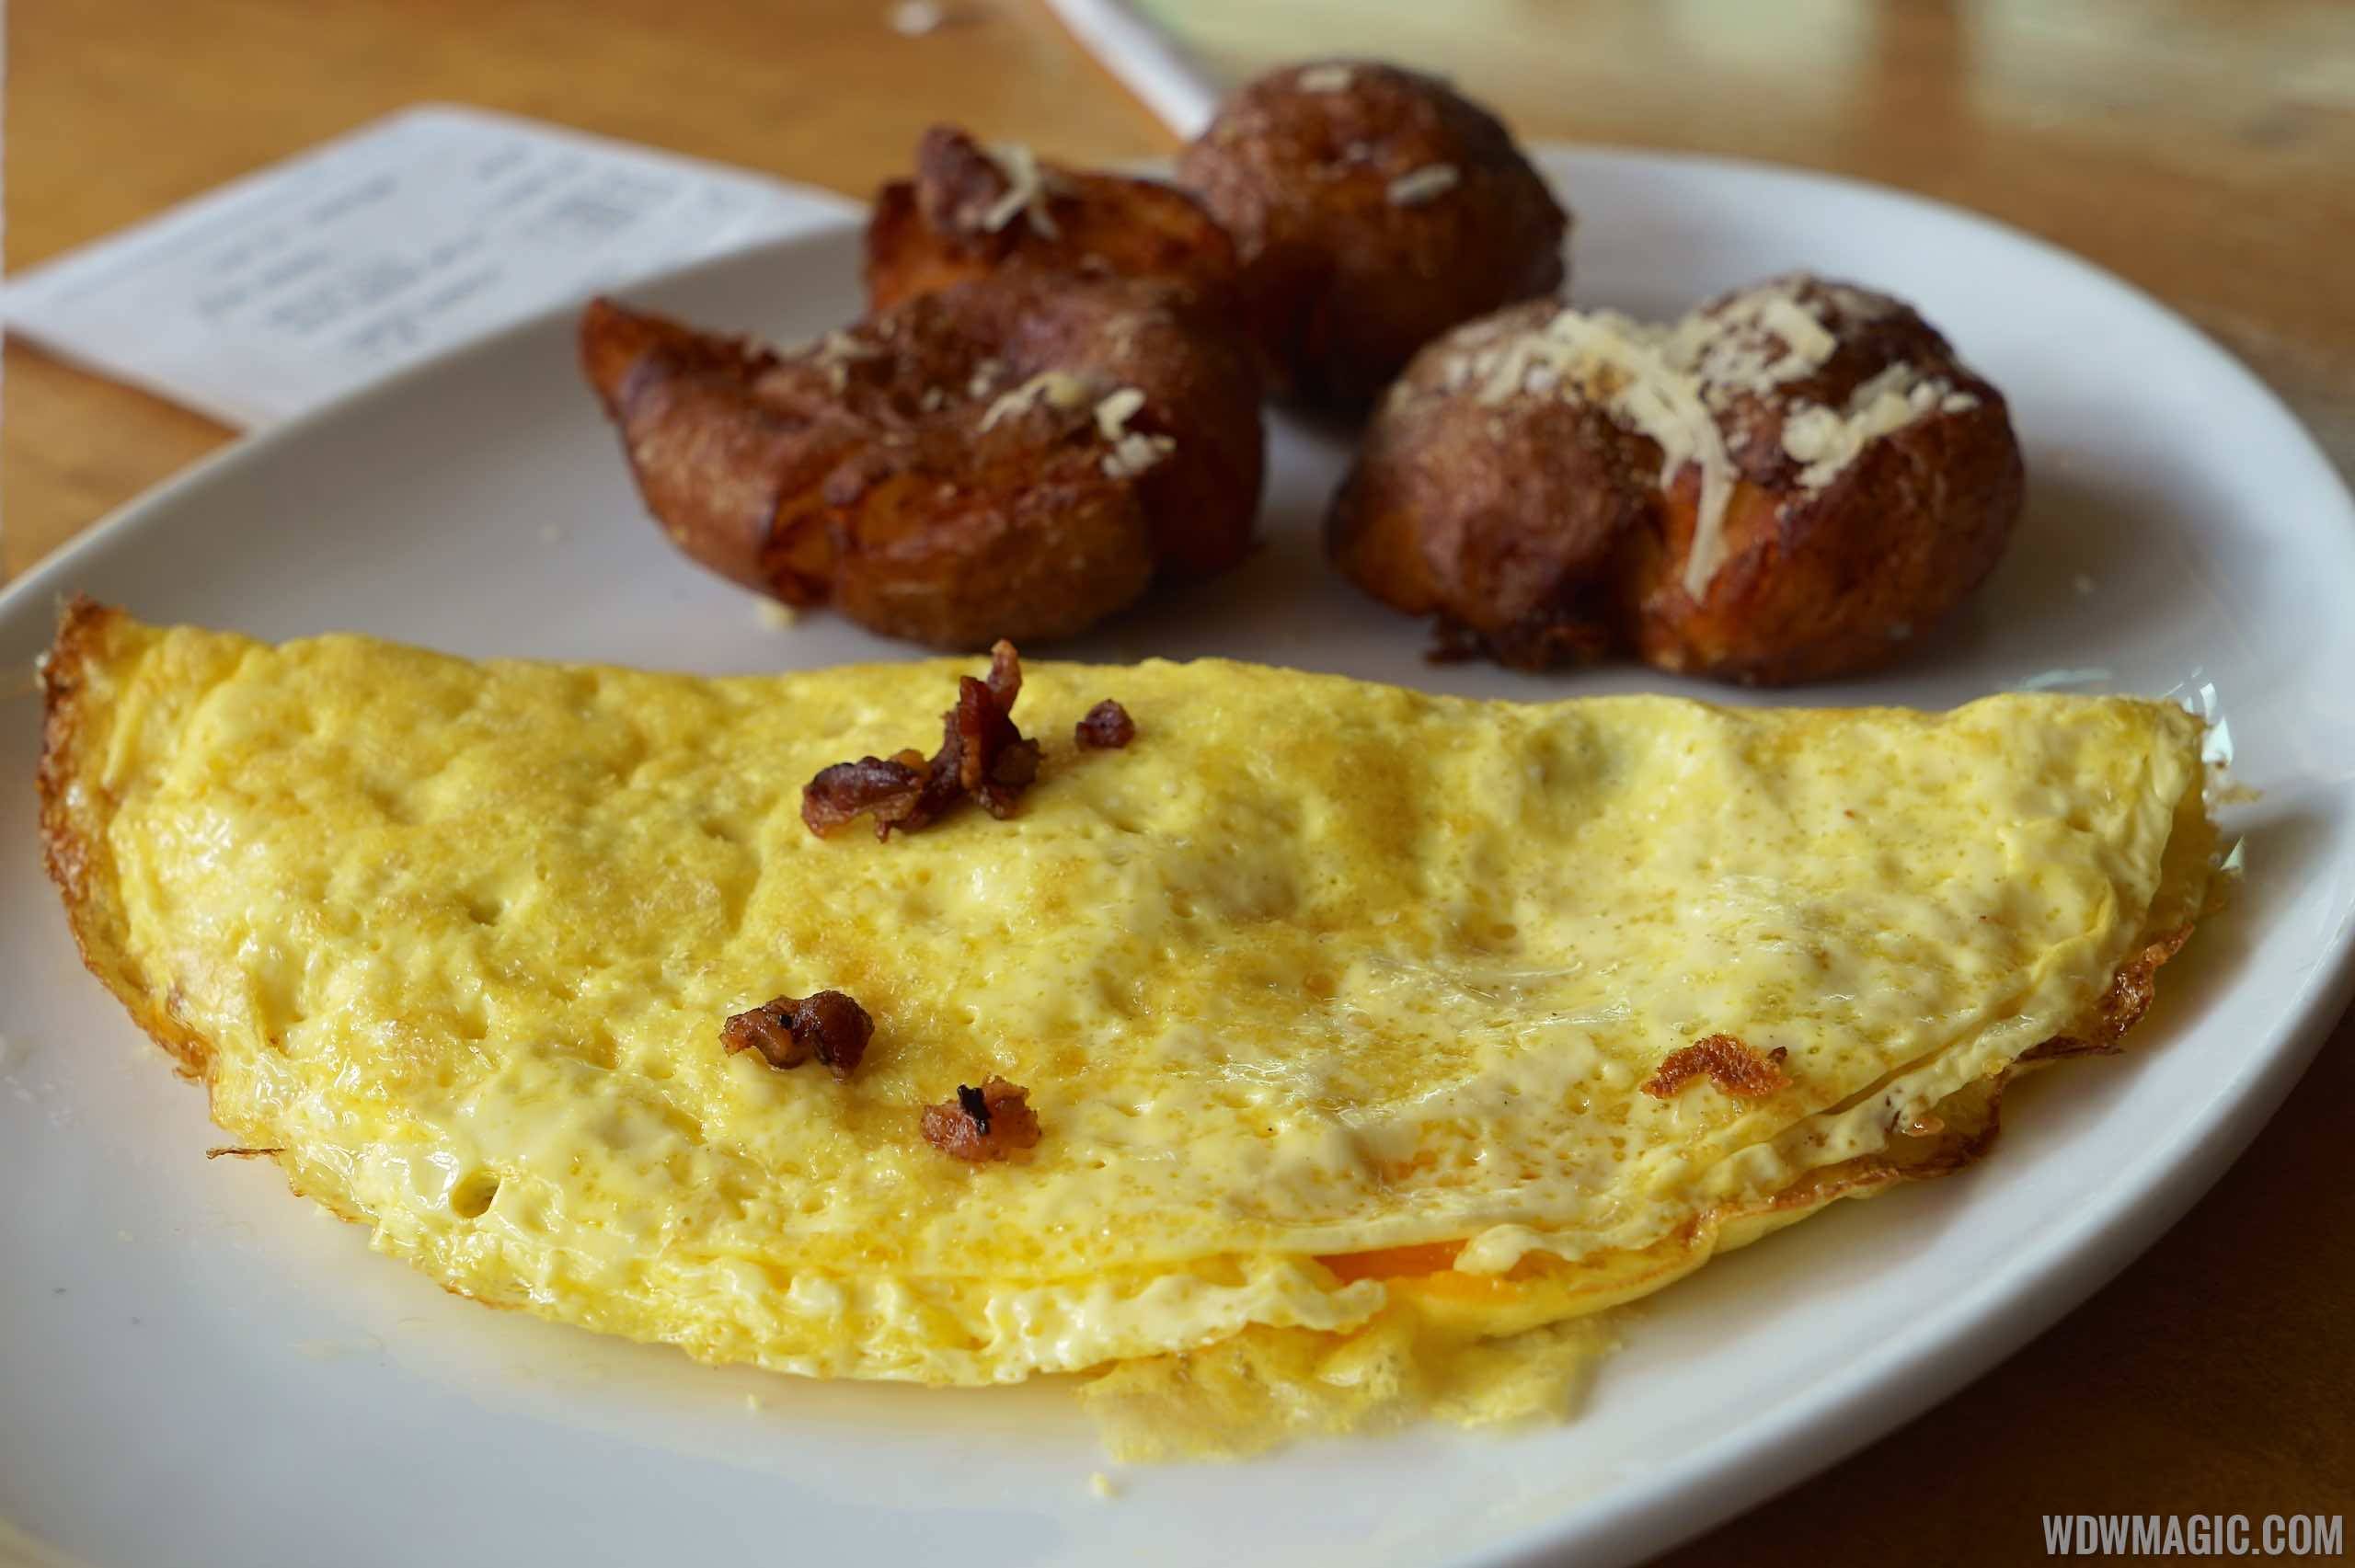 Wolfgang Puck Express Marketplace breakfast - Bacon & Cheddar Omelet with Crispy Potatoes $13.00